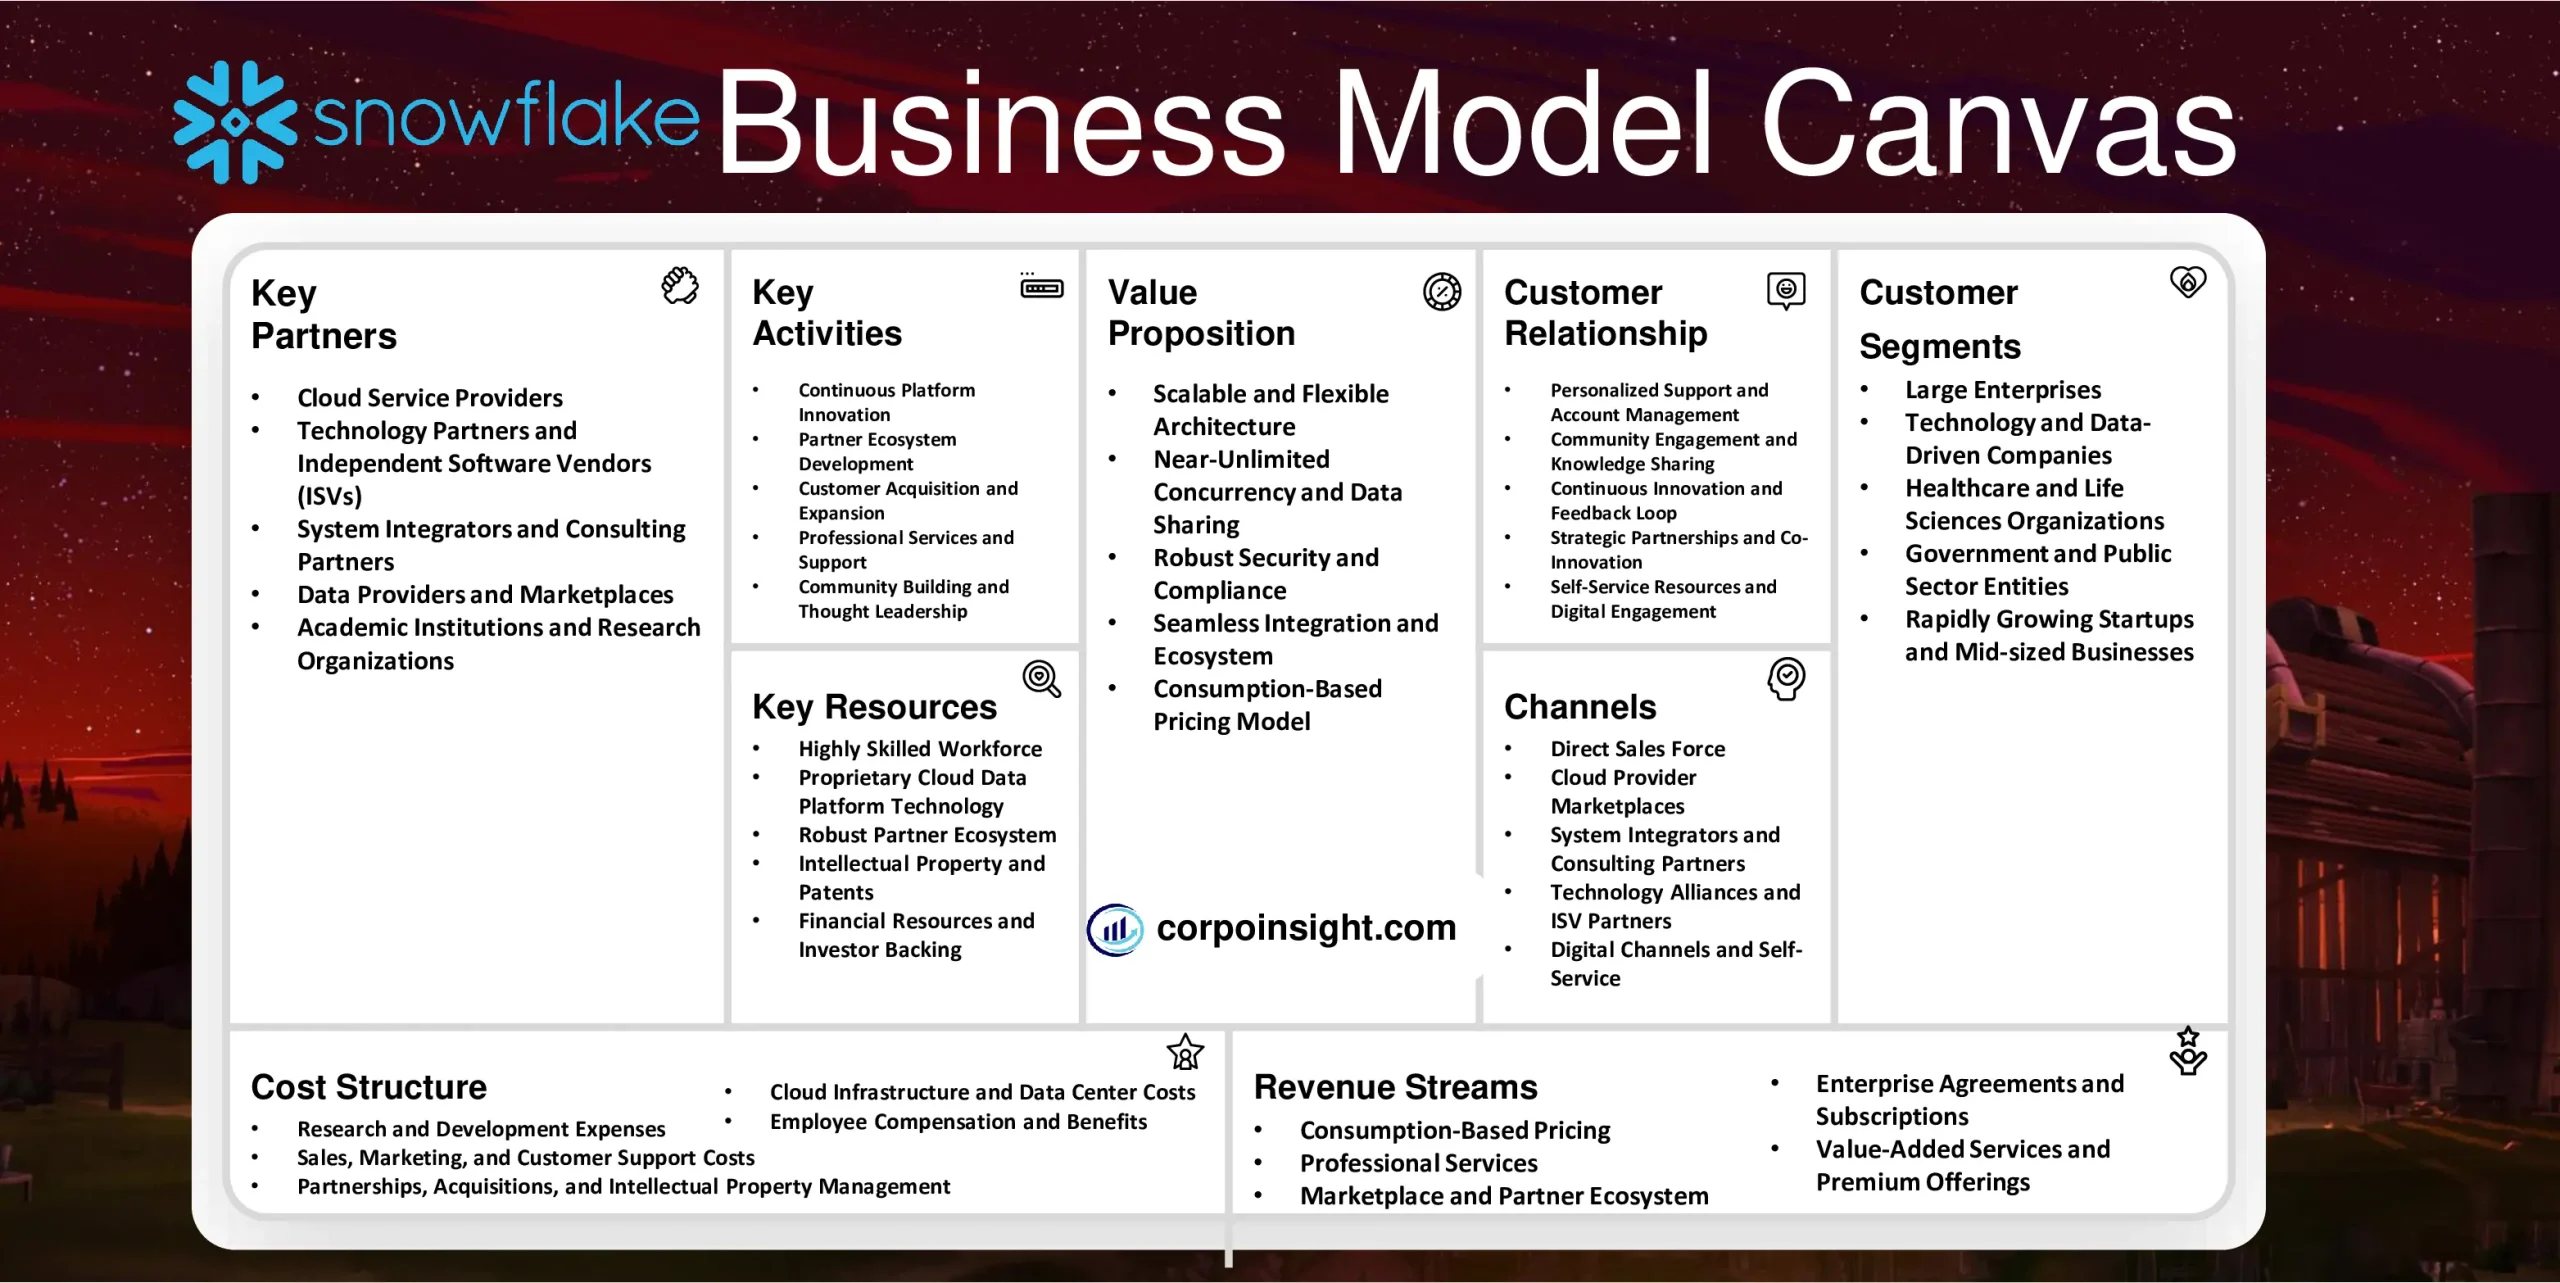 Snowflake Business Model Canvas